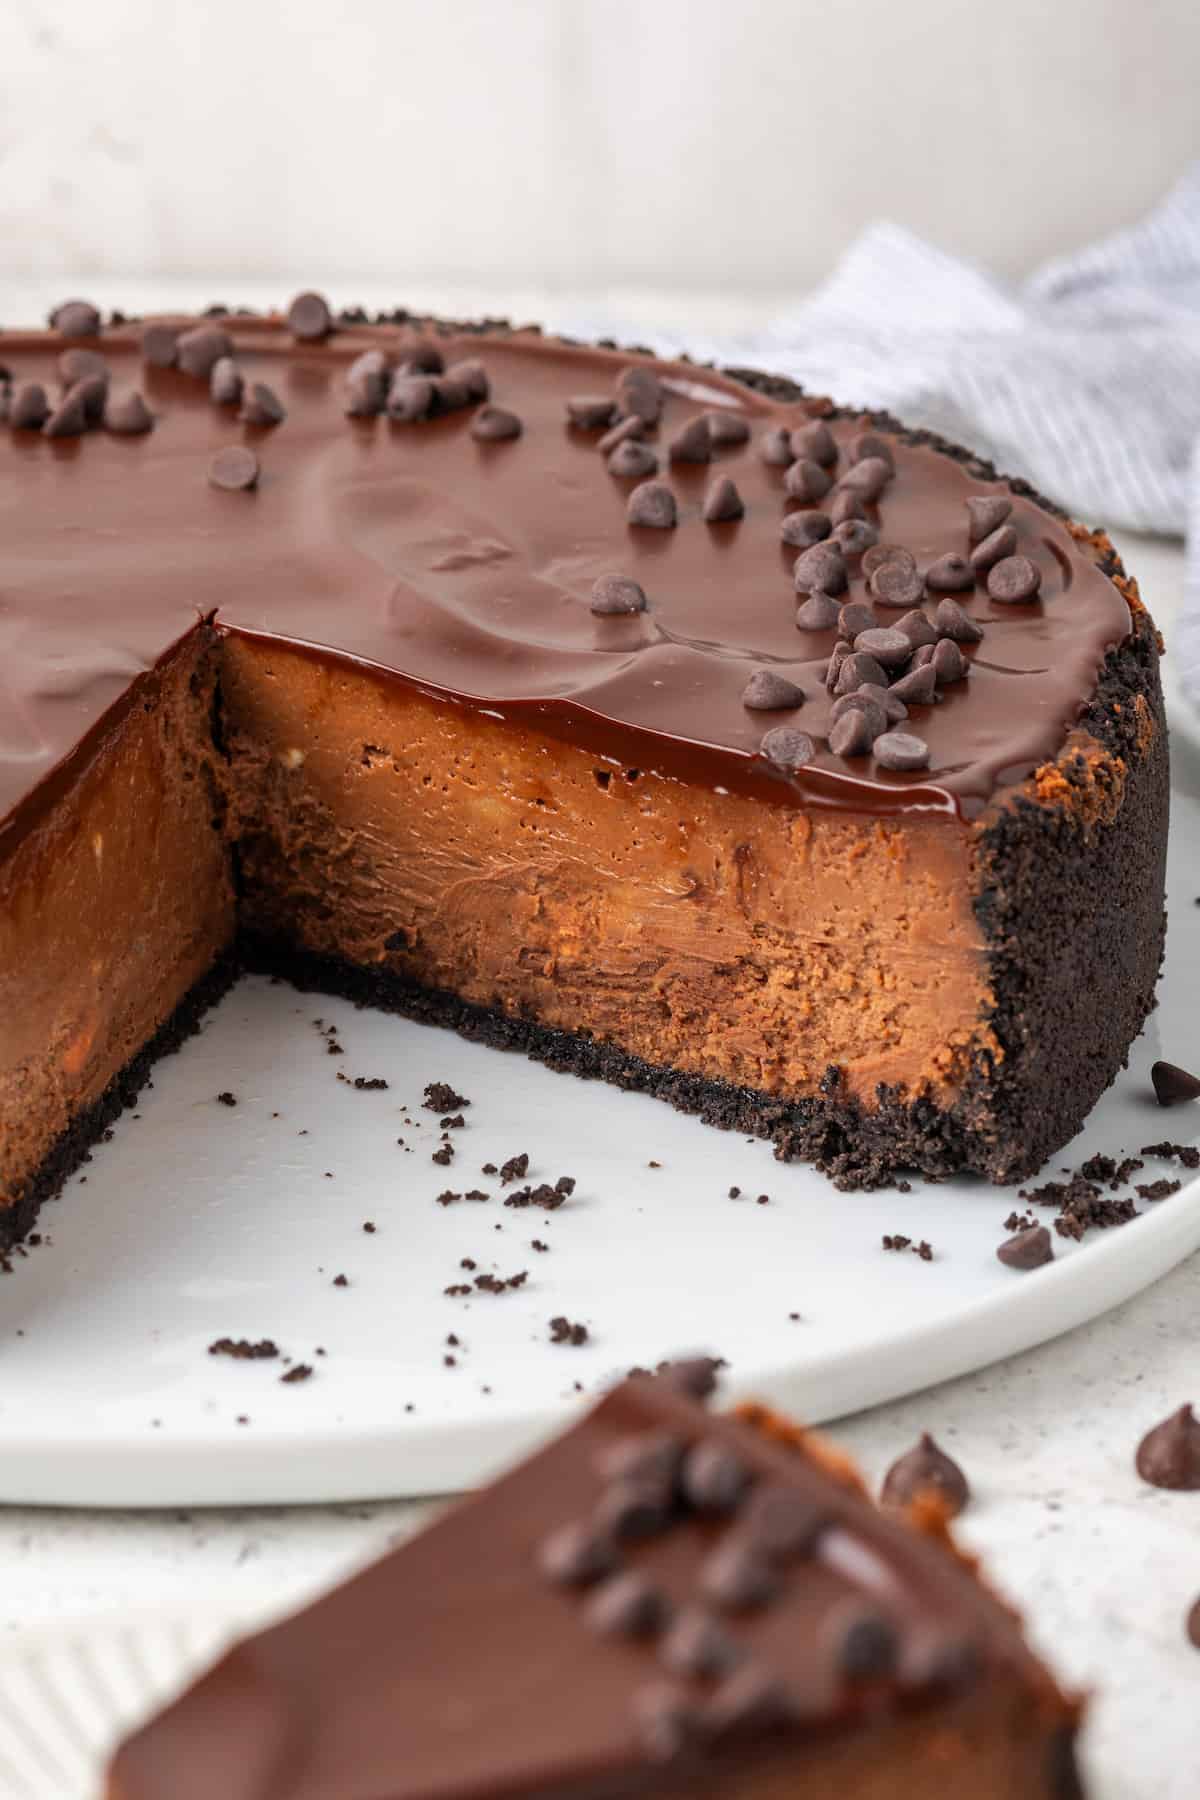 A chocolate cheesecake is shown with slices cut out of it.